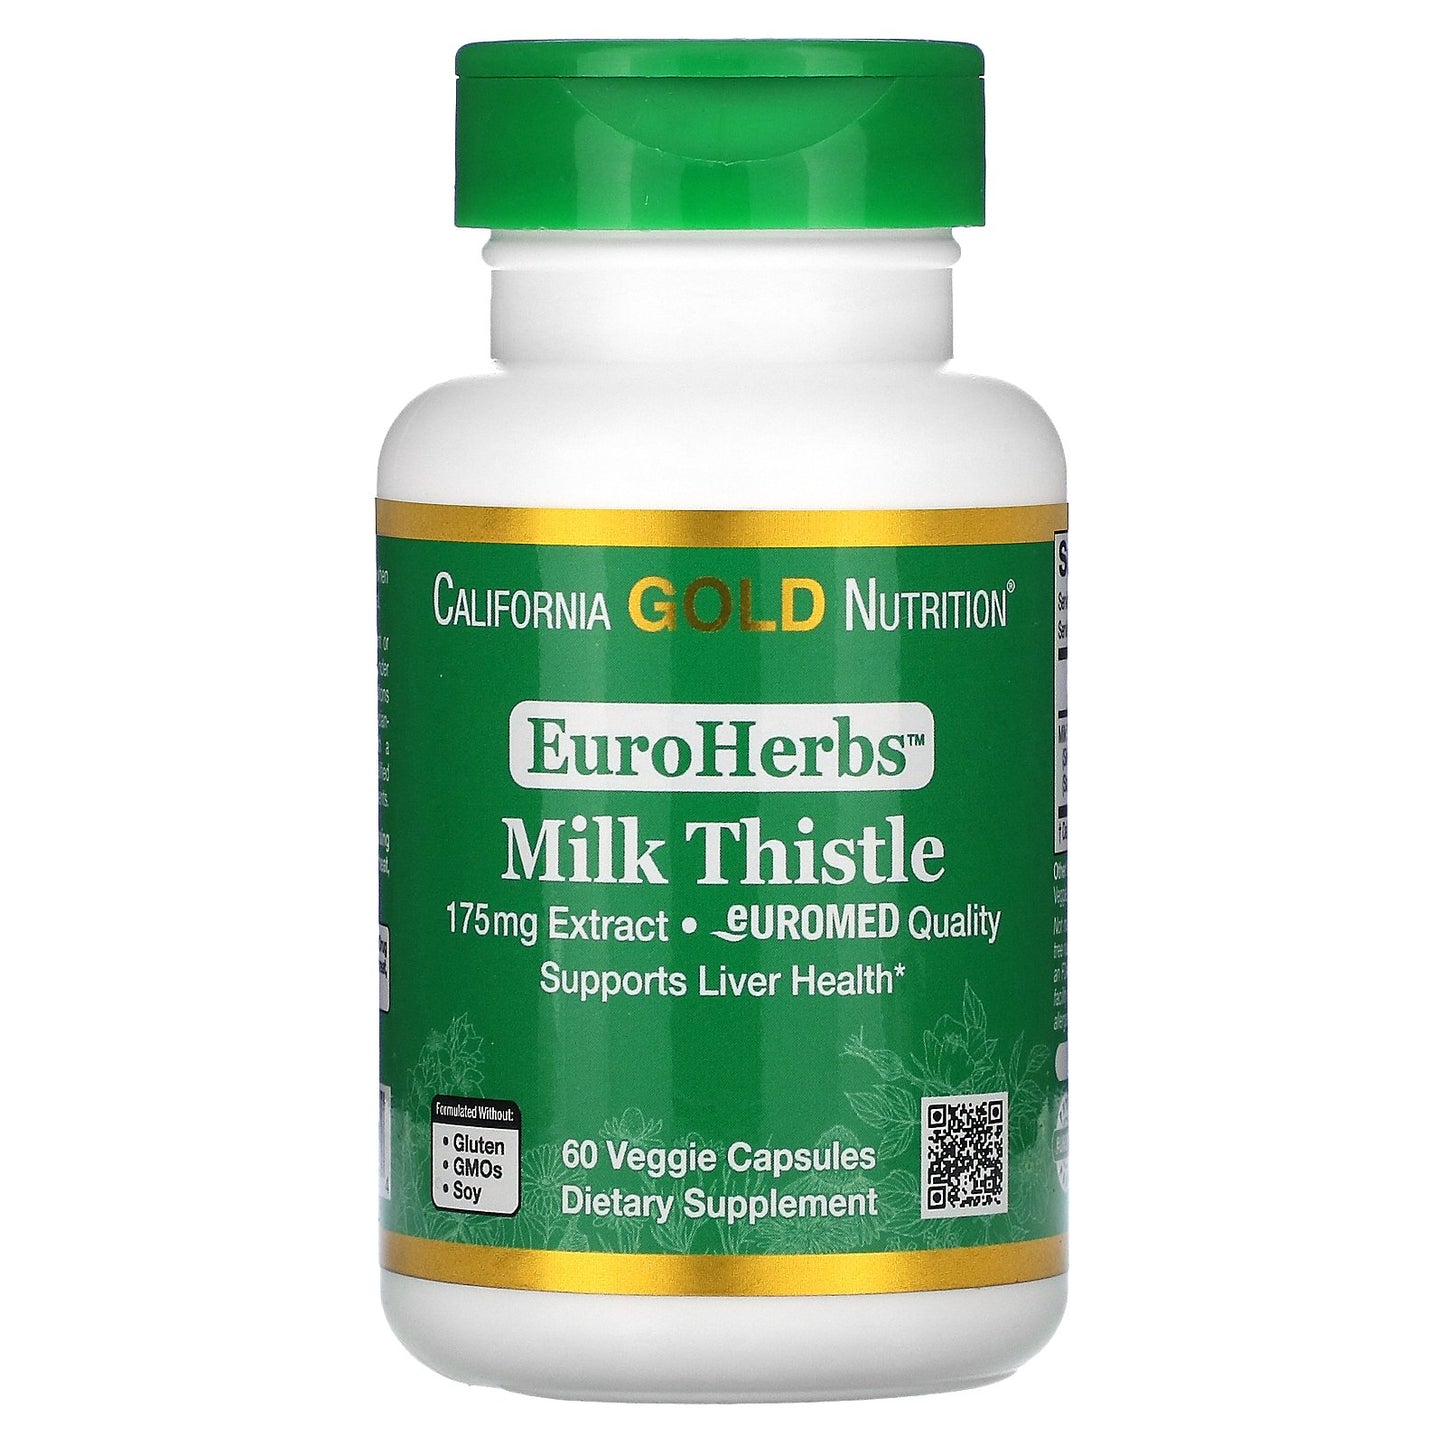 California Gold Nutrition, EuroHerbs, Milk Thistle Extract, Euromed Quality, 175 mg, 60 Veggie Capsules